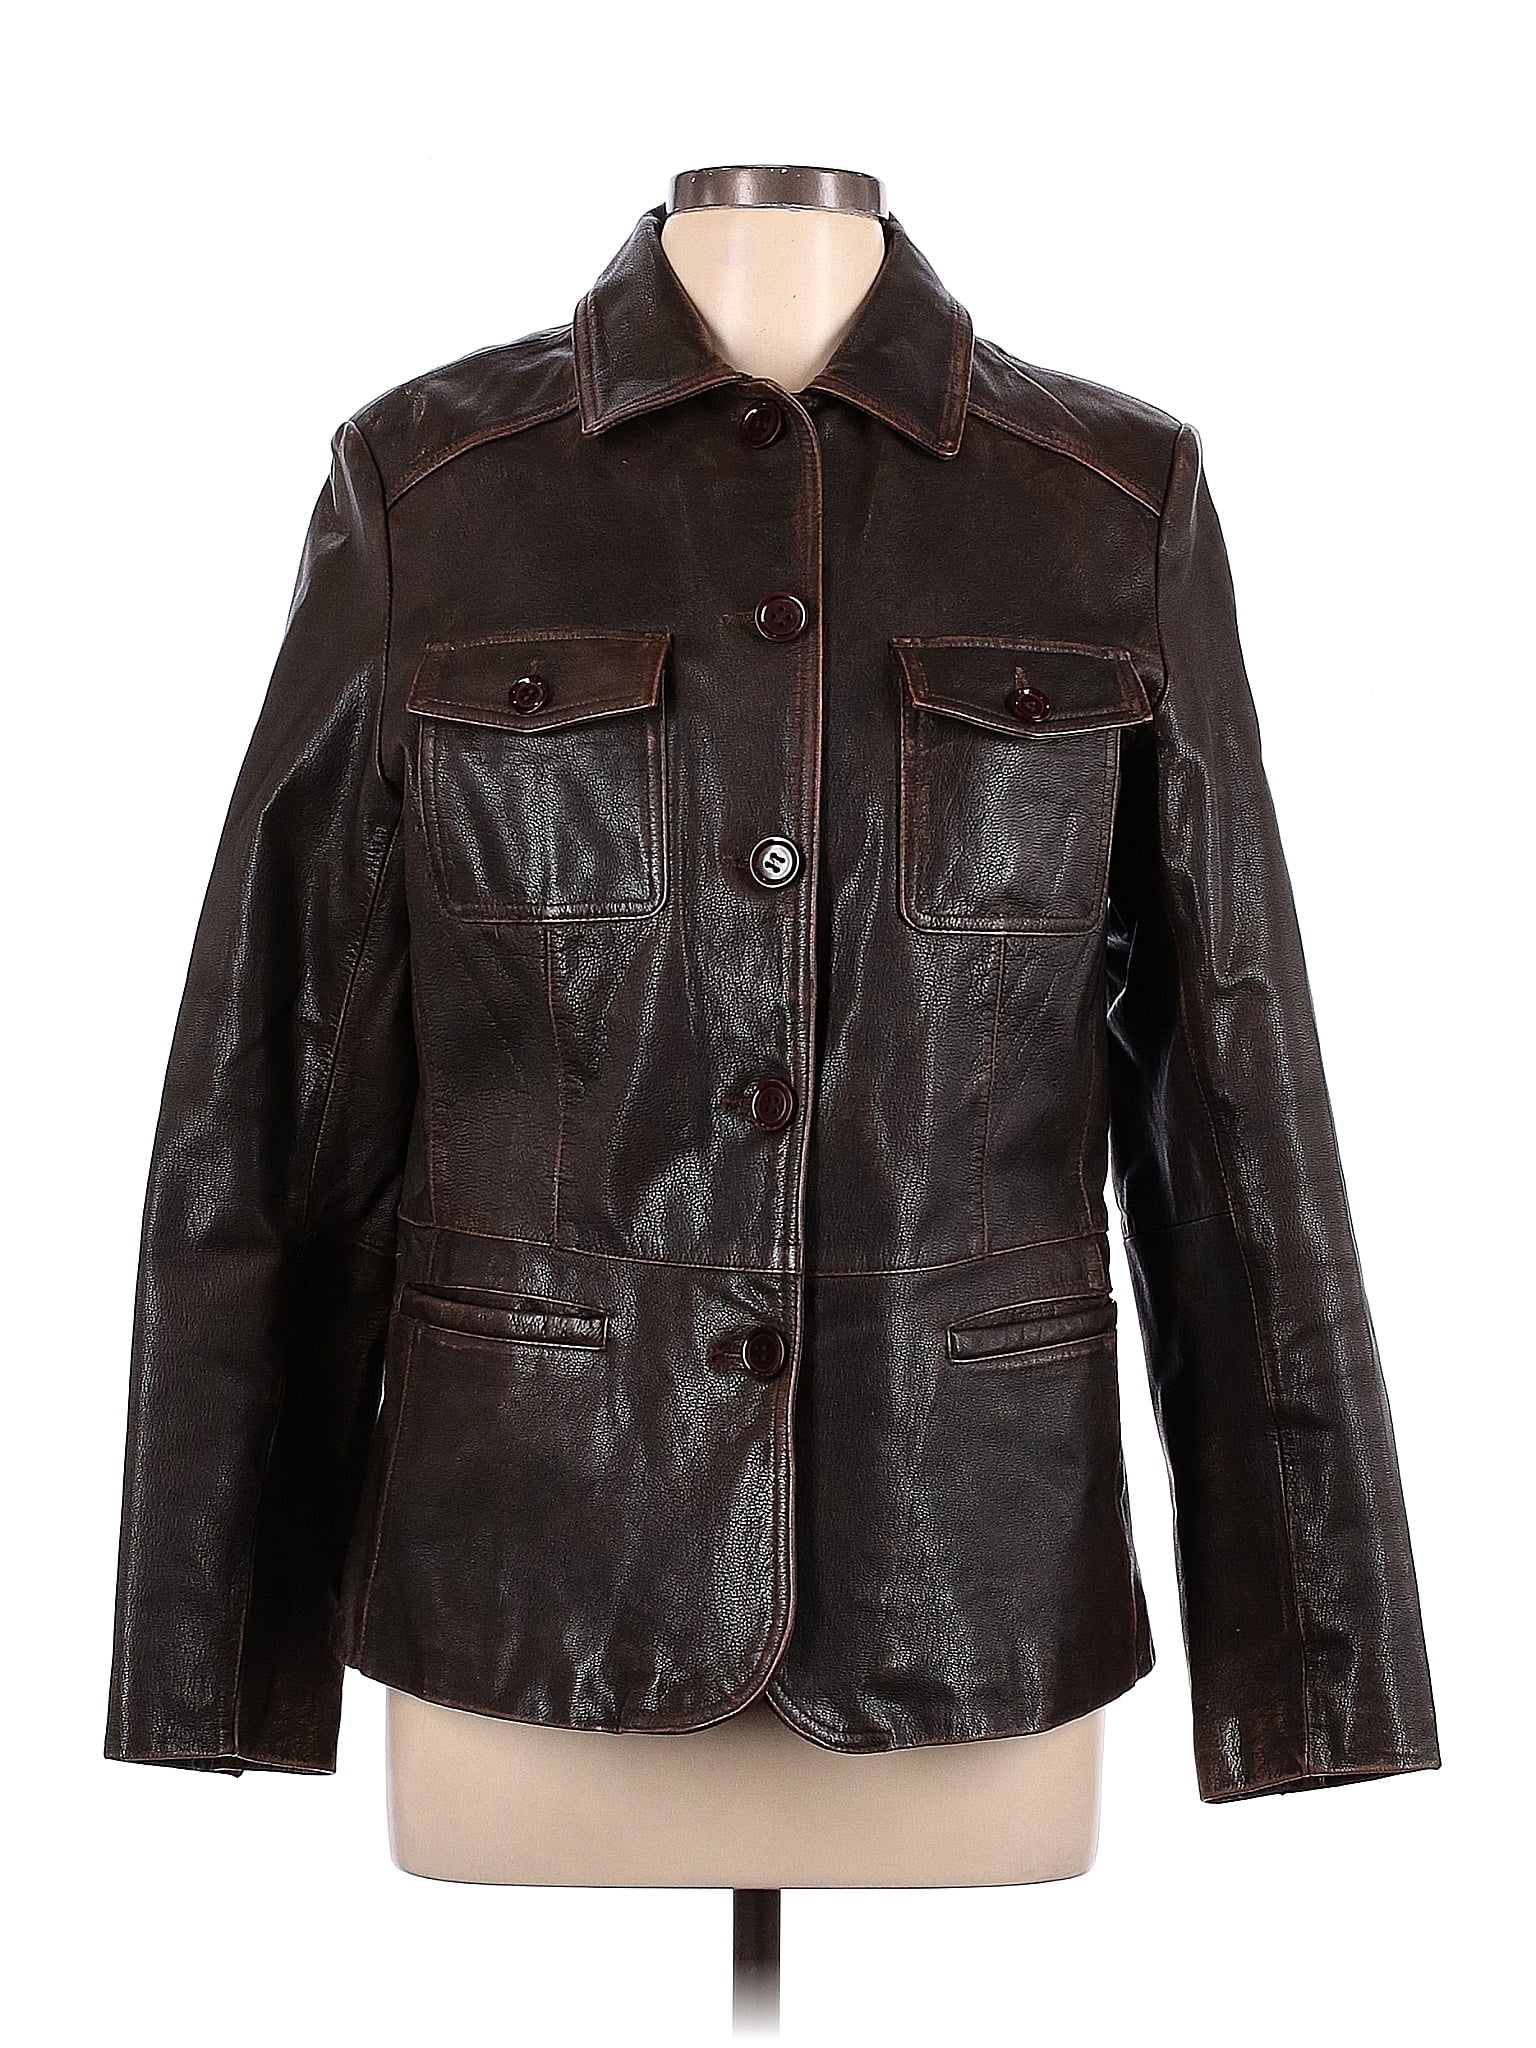 Orvis 100% Leather Solid Brown Leather Jacket Size L - 72% off | thredUP